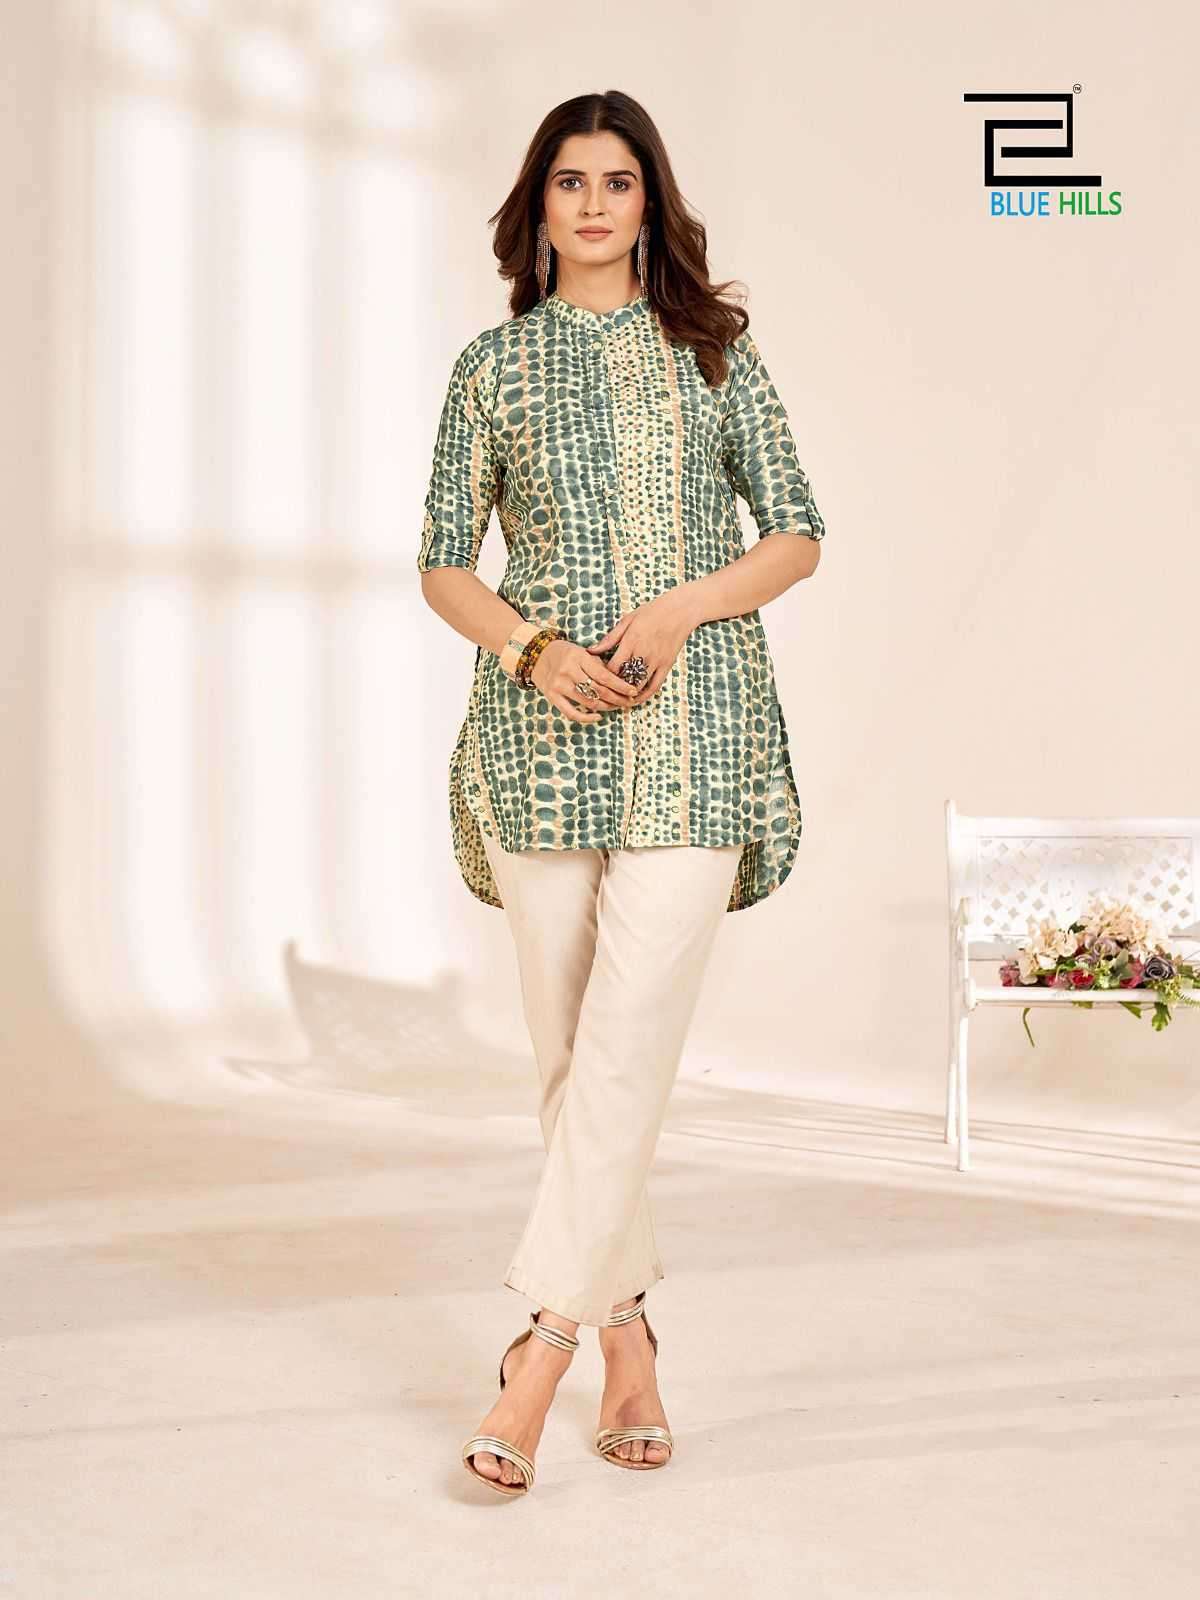 CAPPUCCINO SERIES 1001 TO 1004 BY BLUE HILLS DESIGNER PRINTED RAYON TOPS ARE AVAILABLE AT WHOLESALE PRICE